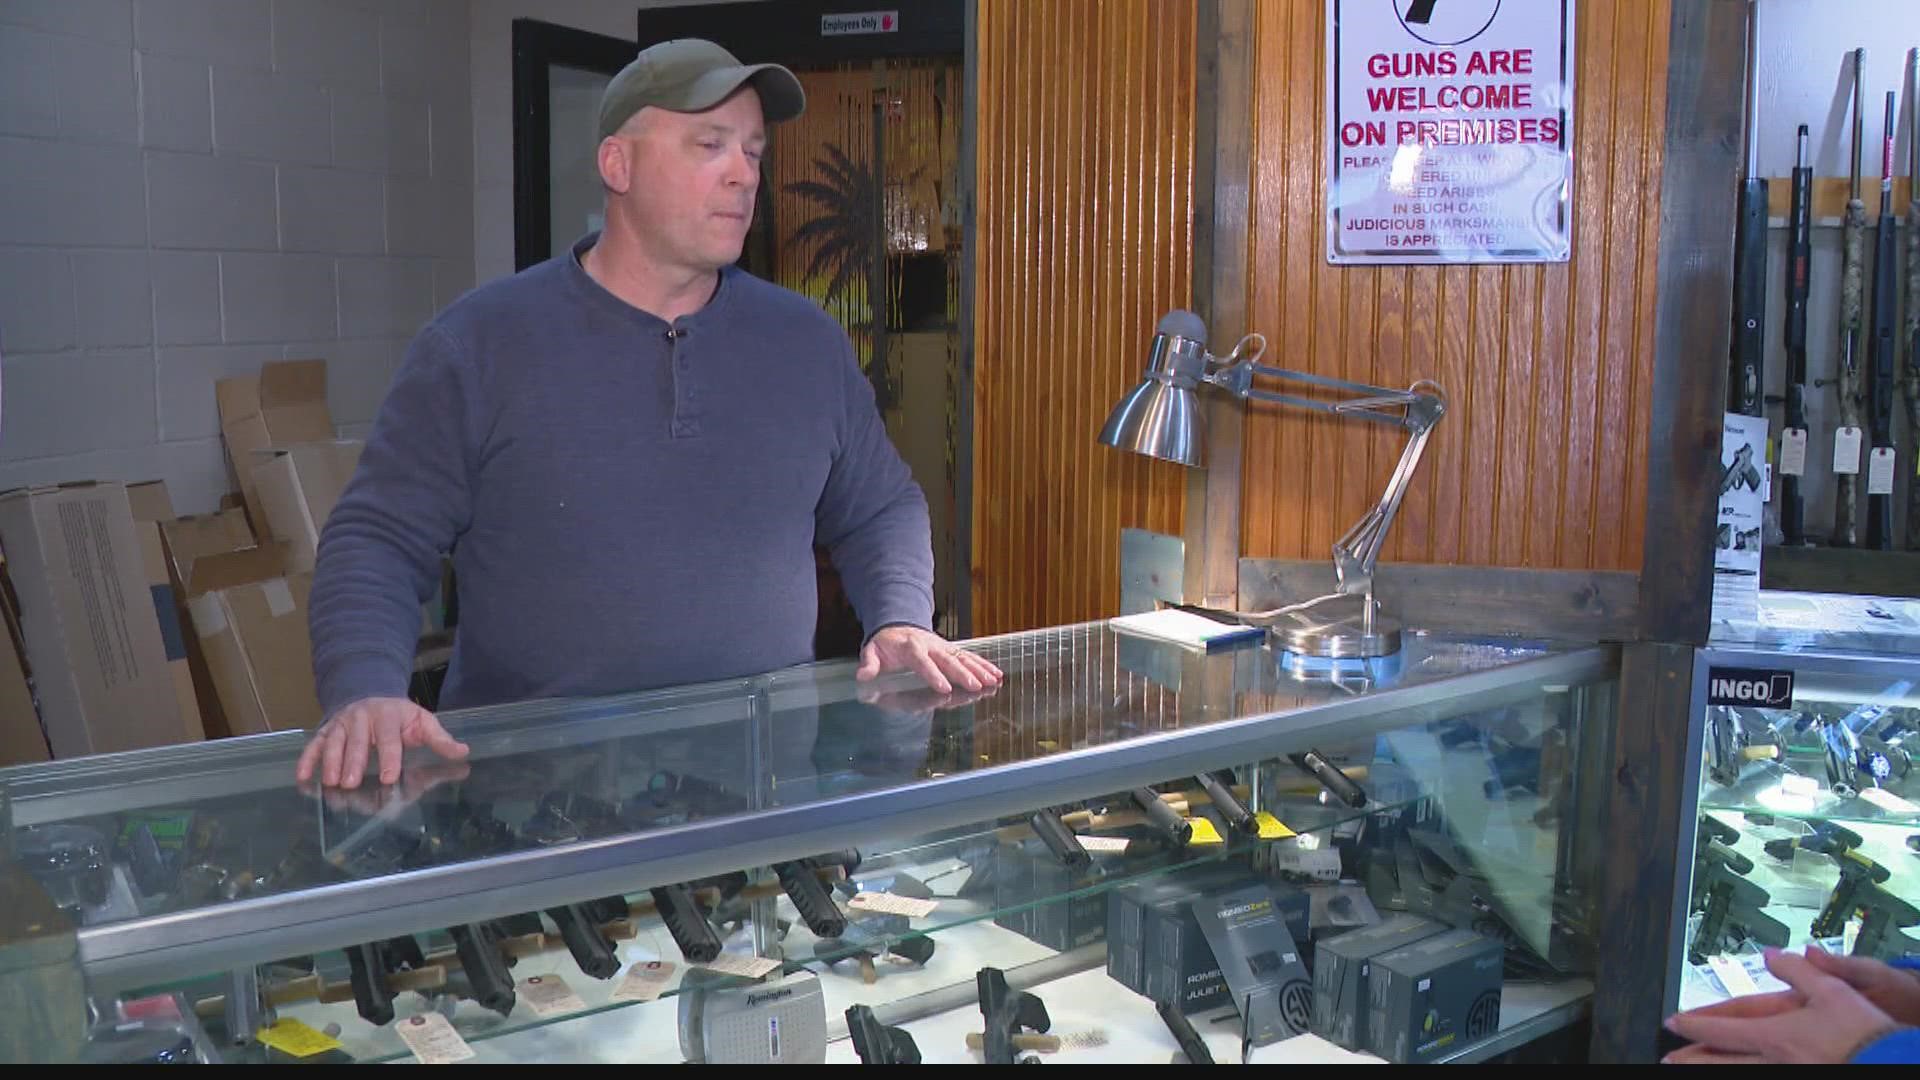 A bill that will allow Indiana gun owners to carry without a permit is headed to the Governor's desk. Our Gina Glaros explains what this could mean for you.